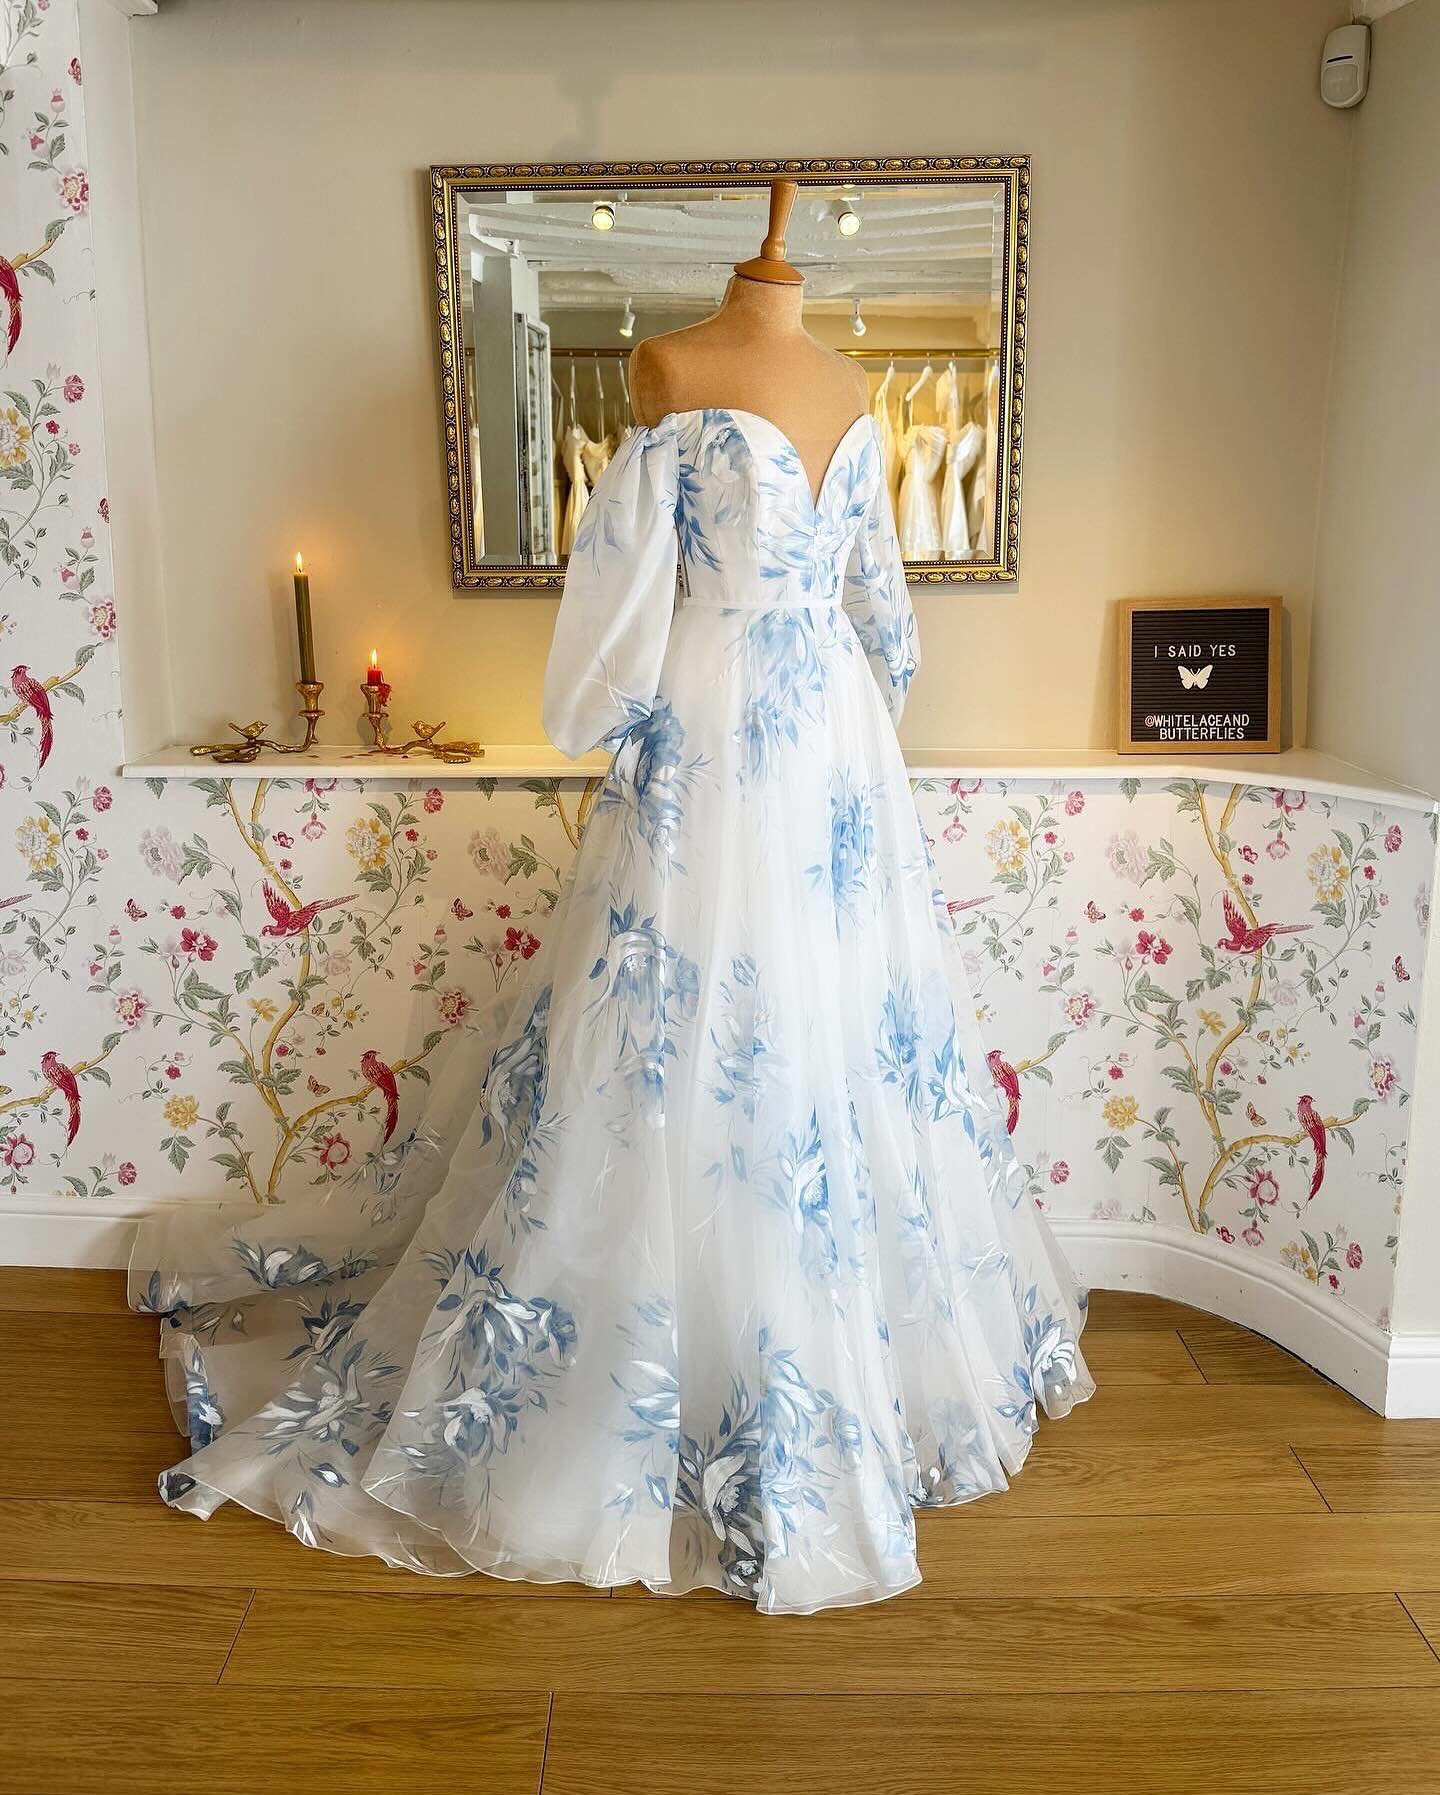 Obsessing over blue 💙

Meet our newest hand painted beauty ~ &lsquo;Jennifer&rsquo; - newer than new from the Priv&egrave; @houseofsavin collection. 

.⁣
.⁣
.⁣
.⁣
#dreamweddingdress #weddingdressshopping #sayyestothedress #2025bride #weddingdresssho